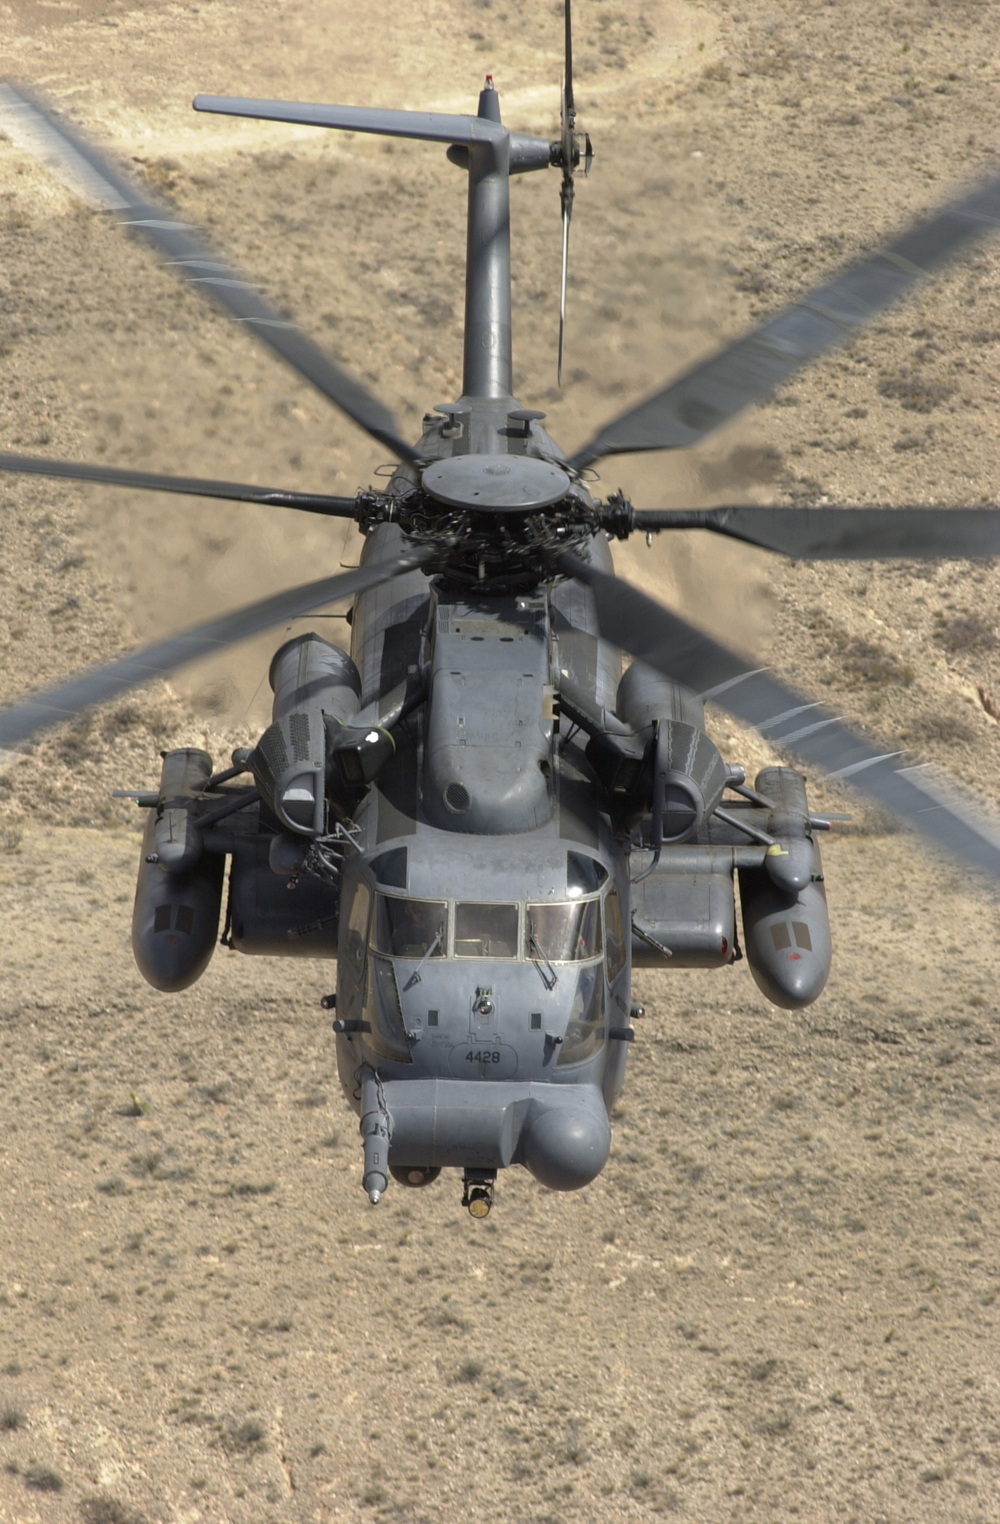 The first super Jolly Green Giant, 66-14428, now upgraded to an MH-53J Pave Low IIIE, assigned to the 551st Special operations Squadron, 58th Special operations Wing, in flight near Kirtland Air Force Base, New Mexico, 24 March 2000. (U.S. Air Force)